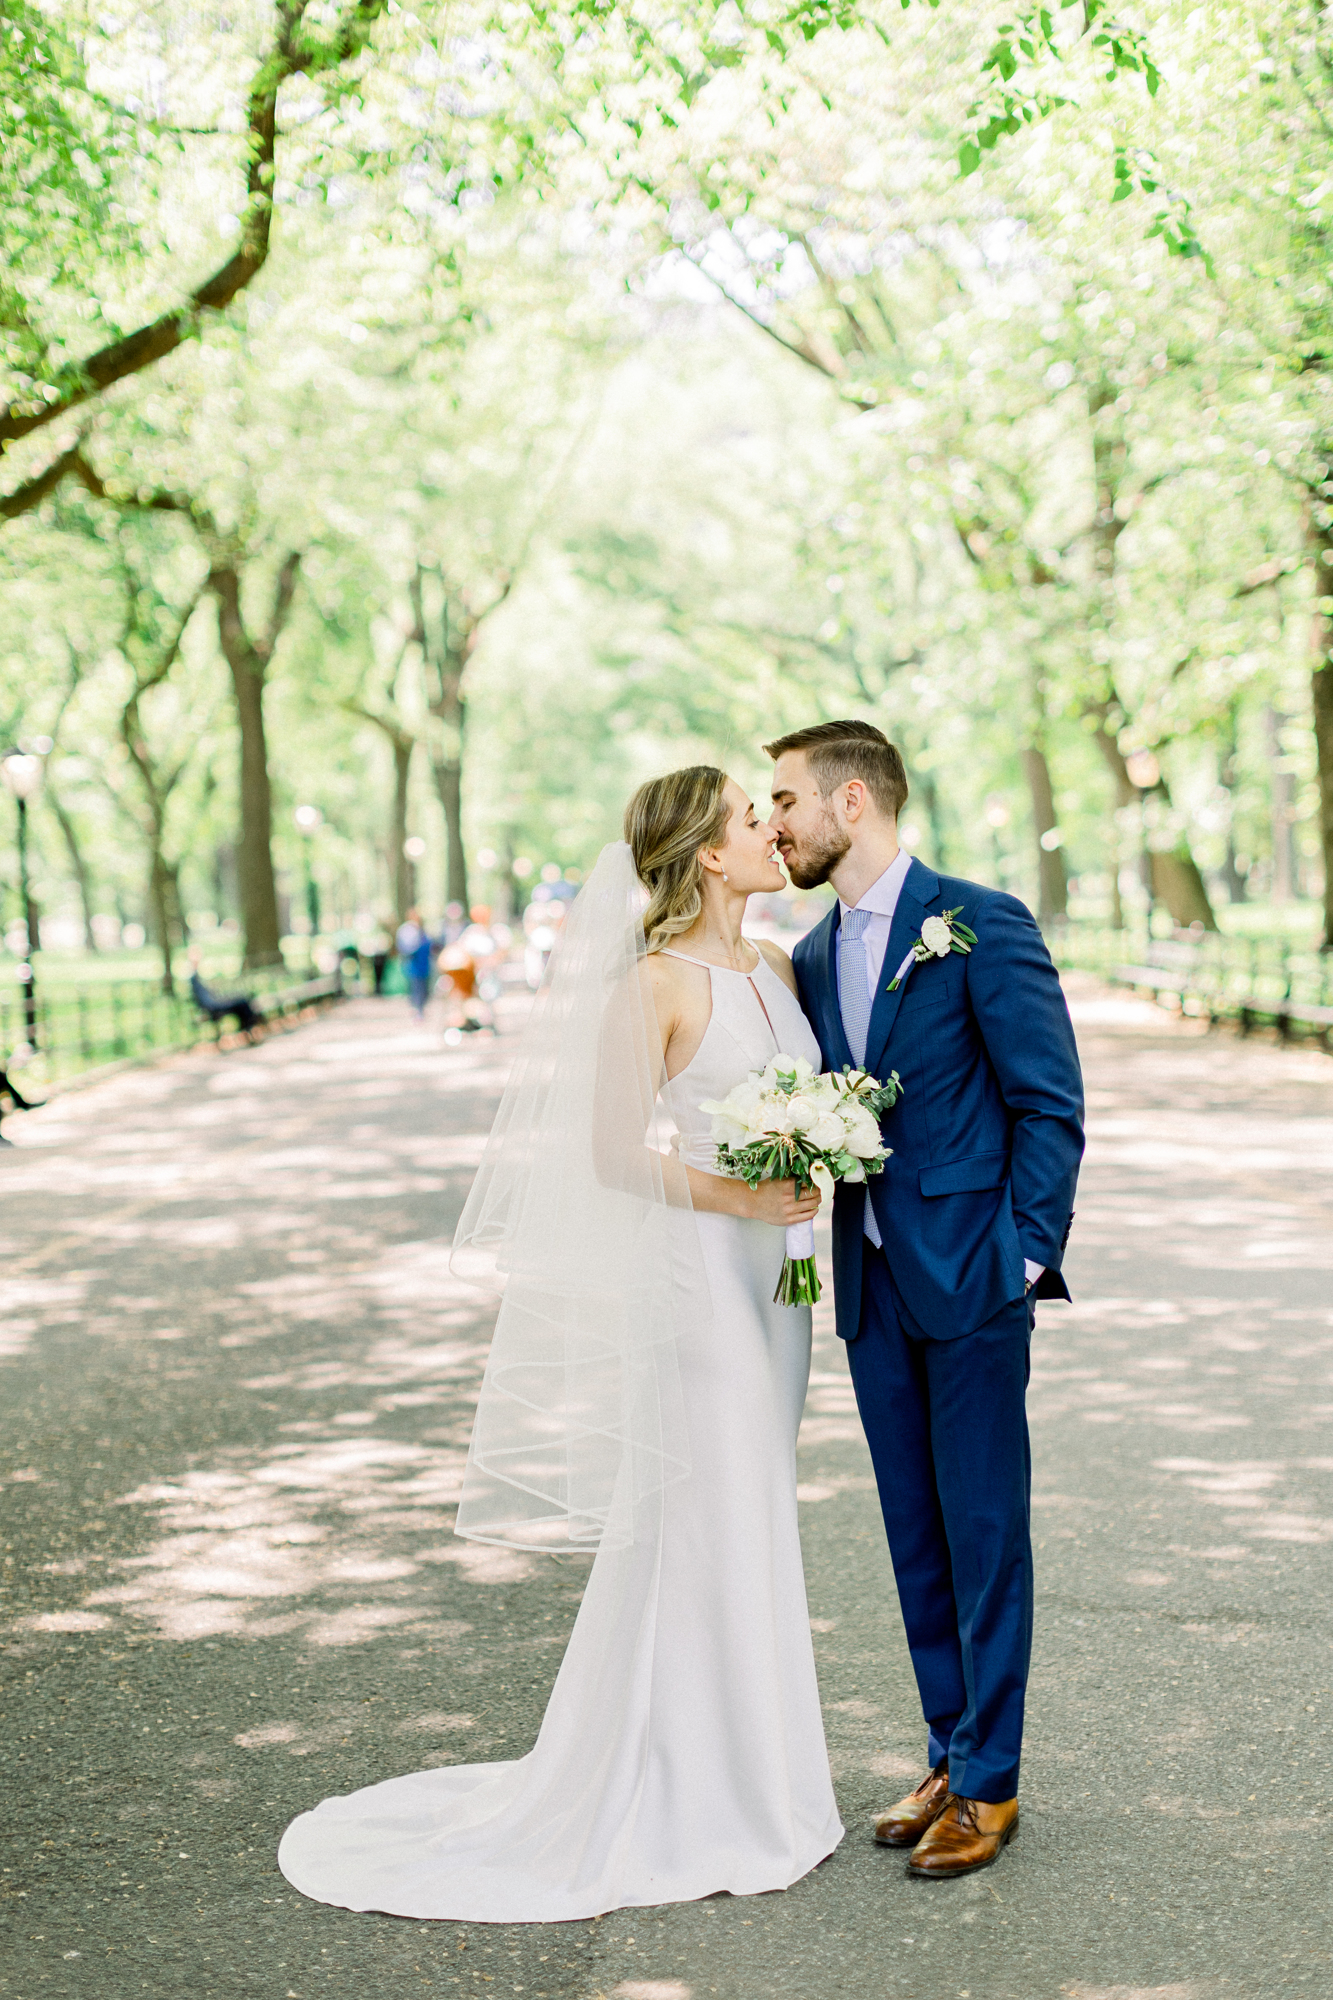 Timeless Wisteria Pergola Elopement Photos in New York\'s Central Park